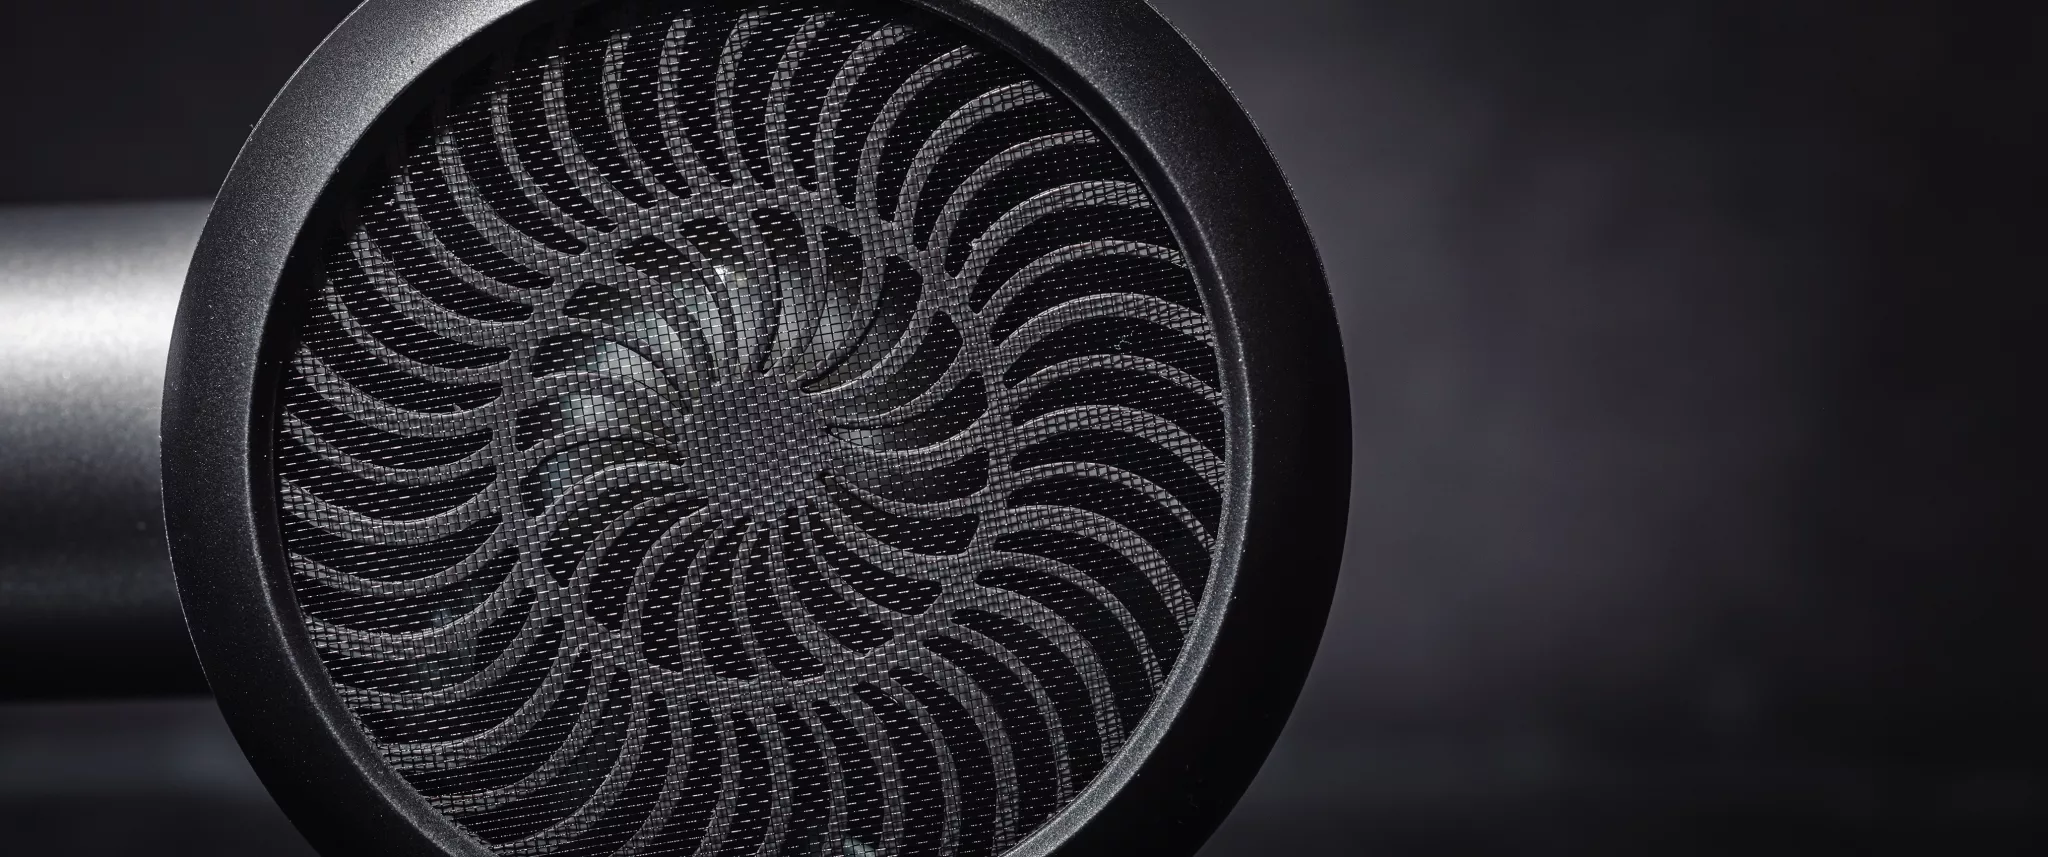 A zoomed in image of the top of a hair dryer.